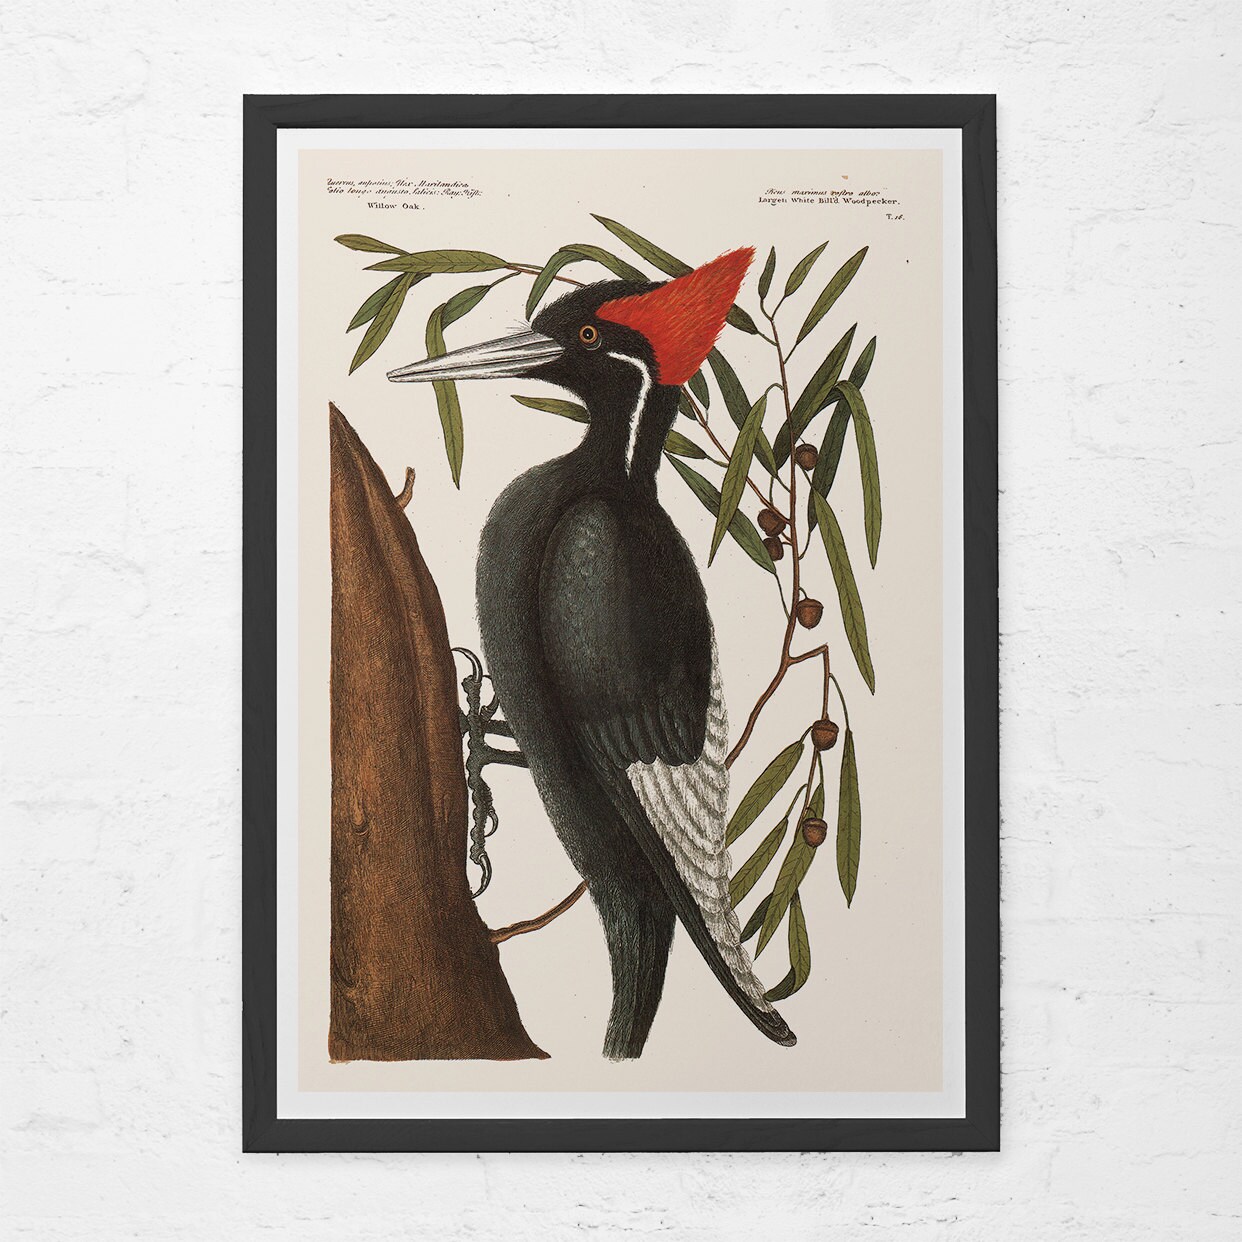 Authentic Vintage Ornithology Lithograph Print Woodpeckers Bird  Illustration